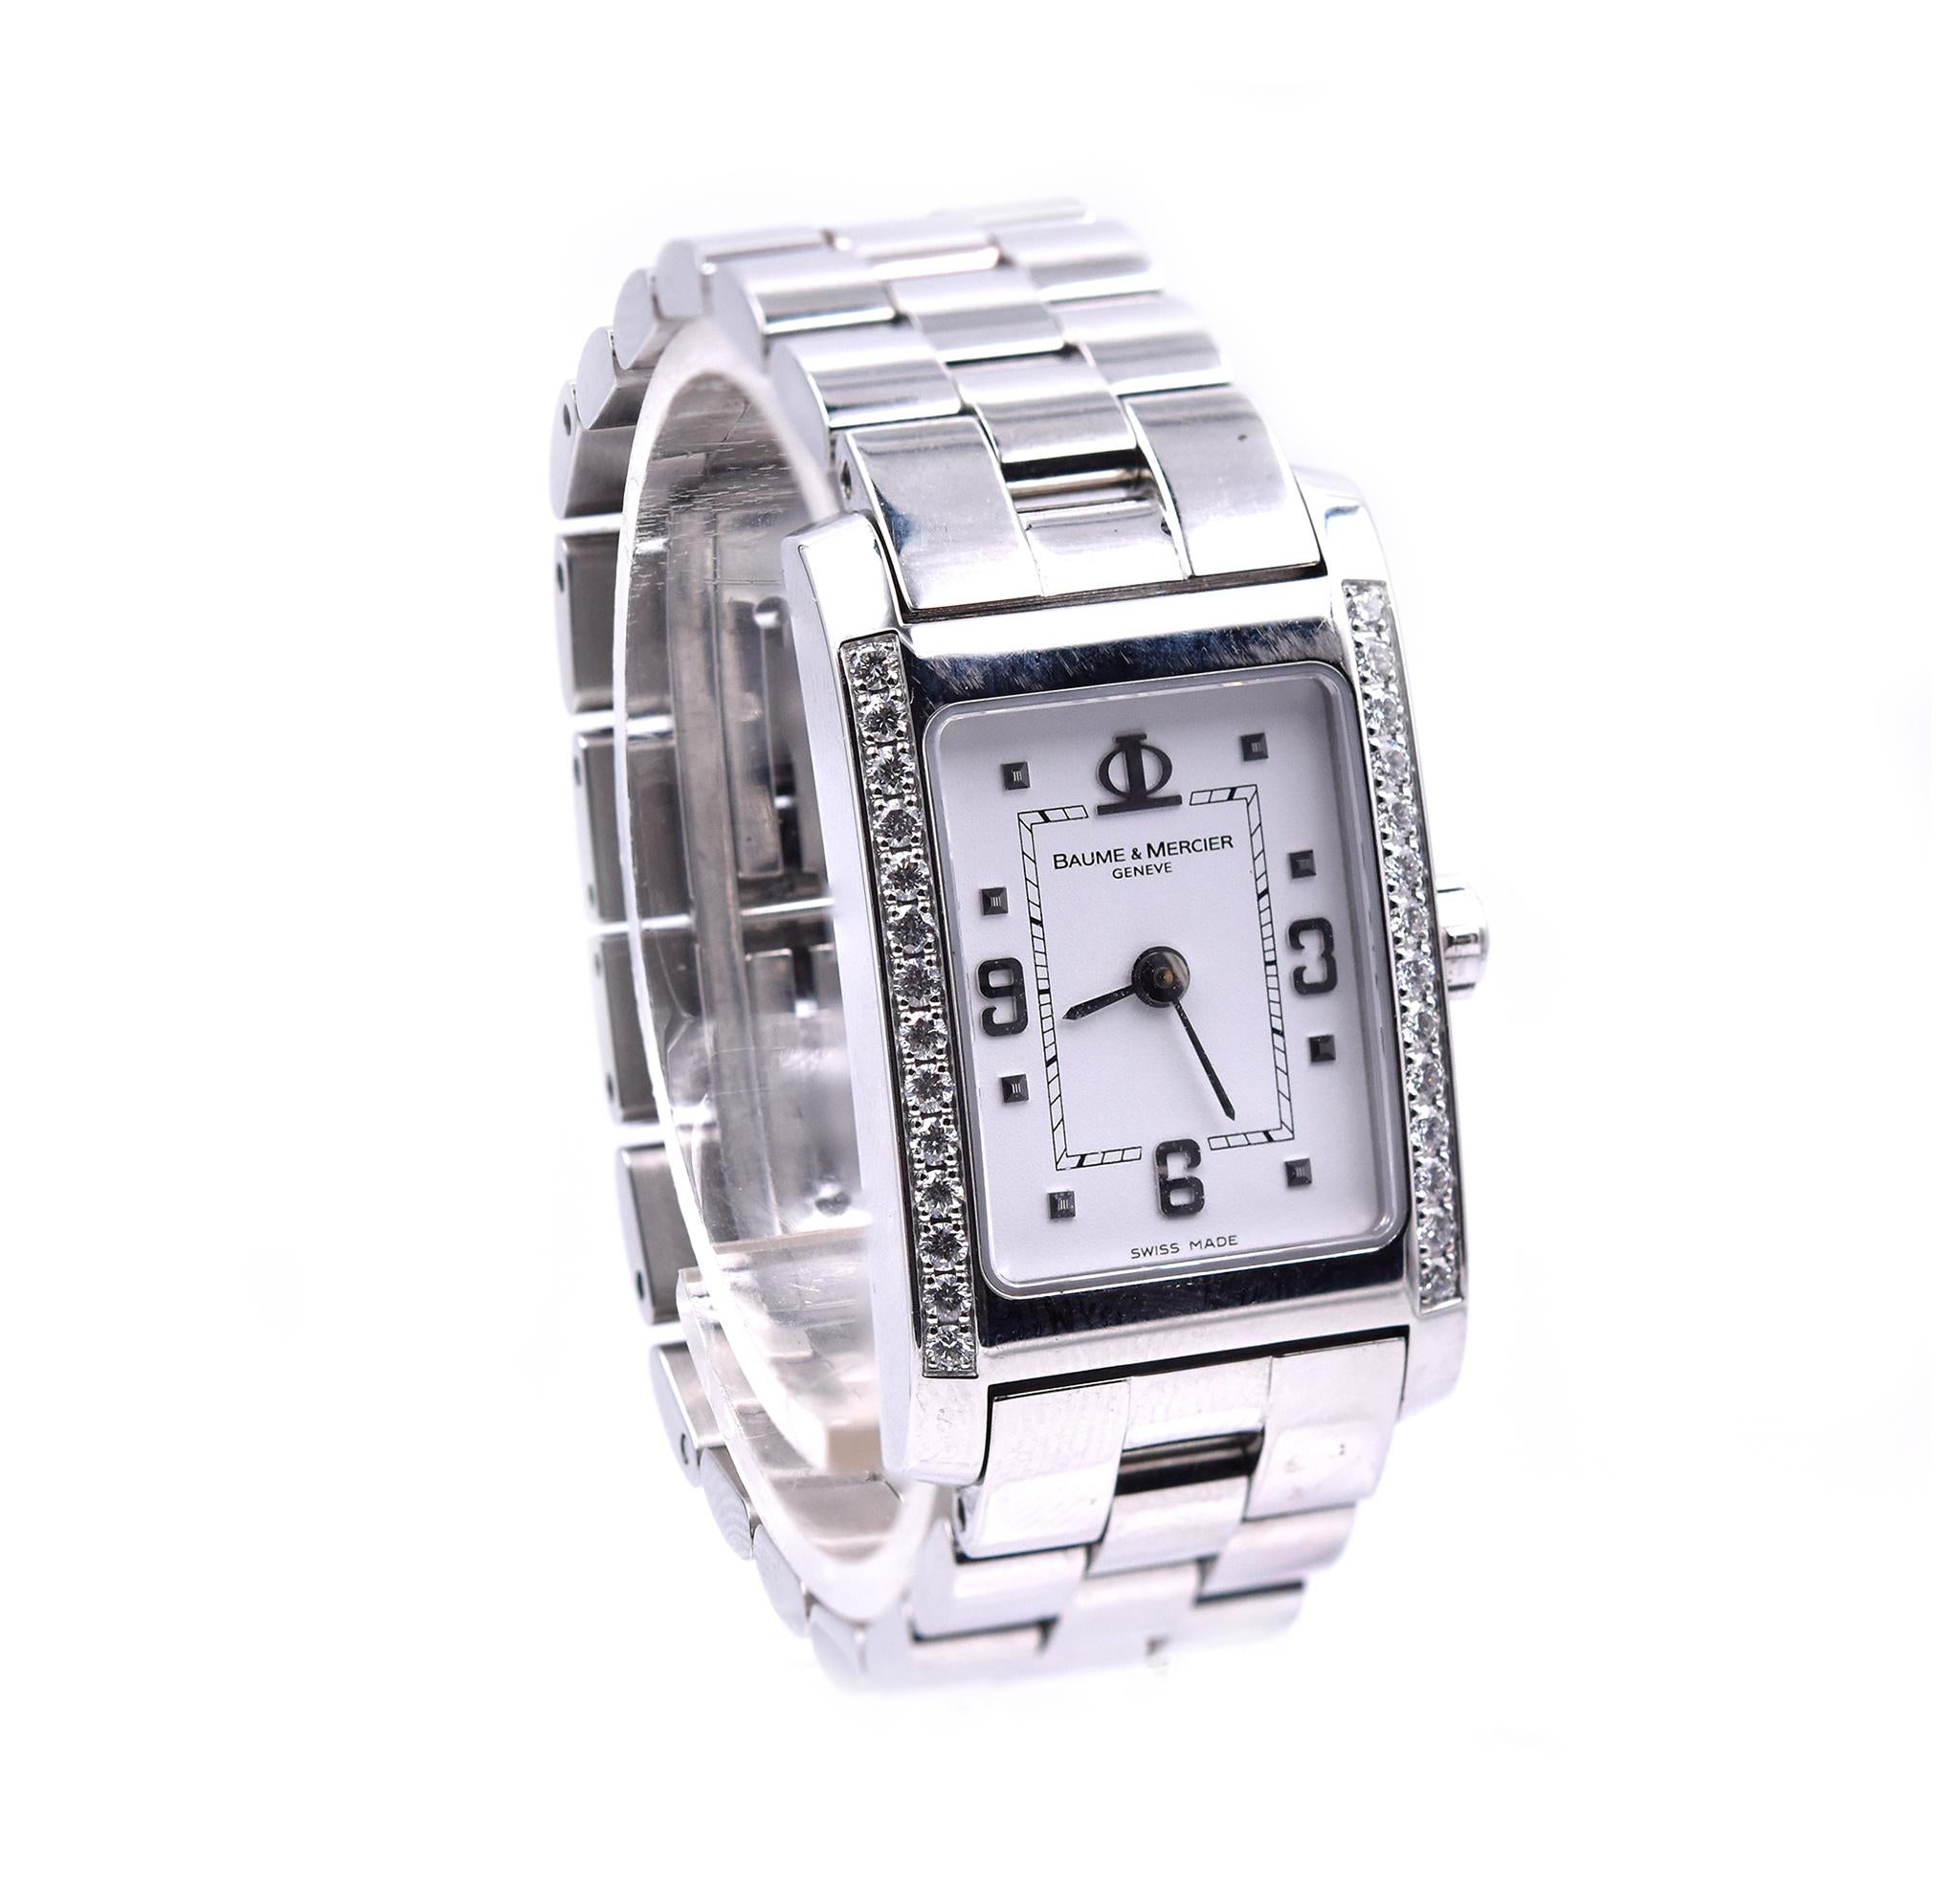 Movement: quartz
Function: hours, minutes
Case: 26 X 20mm stainless steel rectangular case with diamond sides
Band: Baume & Mercier stainless steel bracelet with butterfly clasp
Dial: white arabic dial
Serial #3787XXX
Reference # 65406


No box or